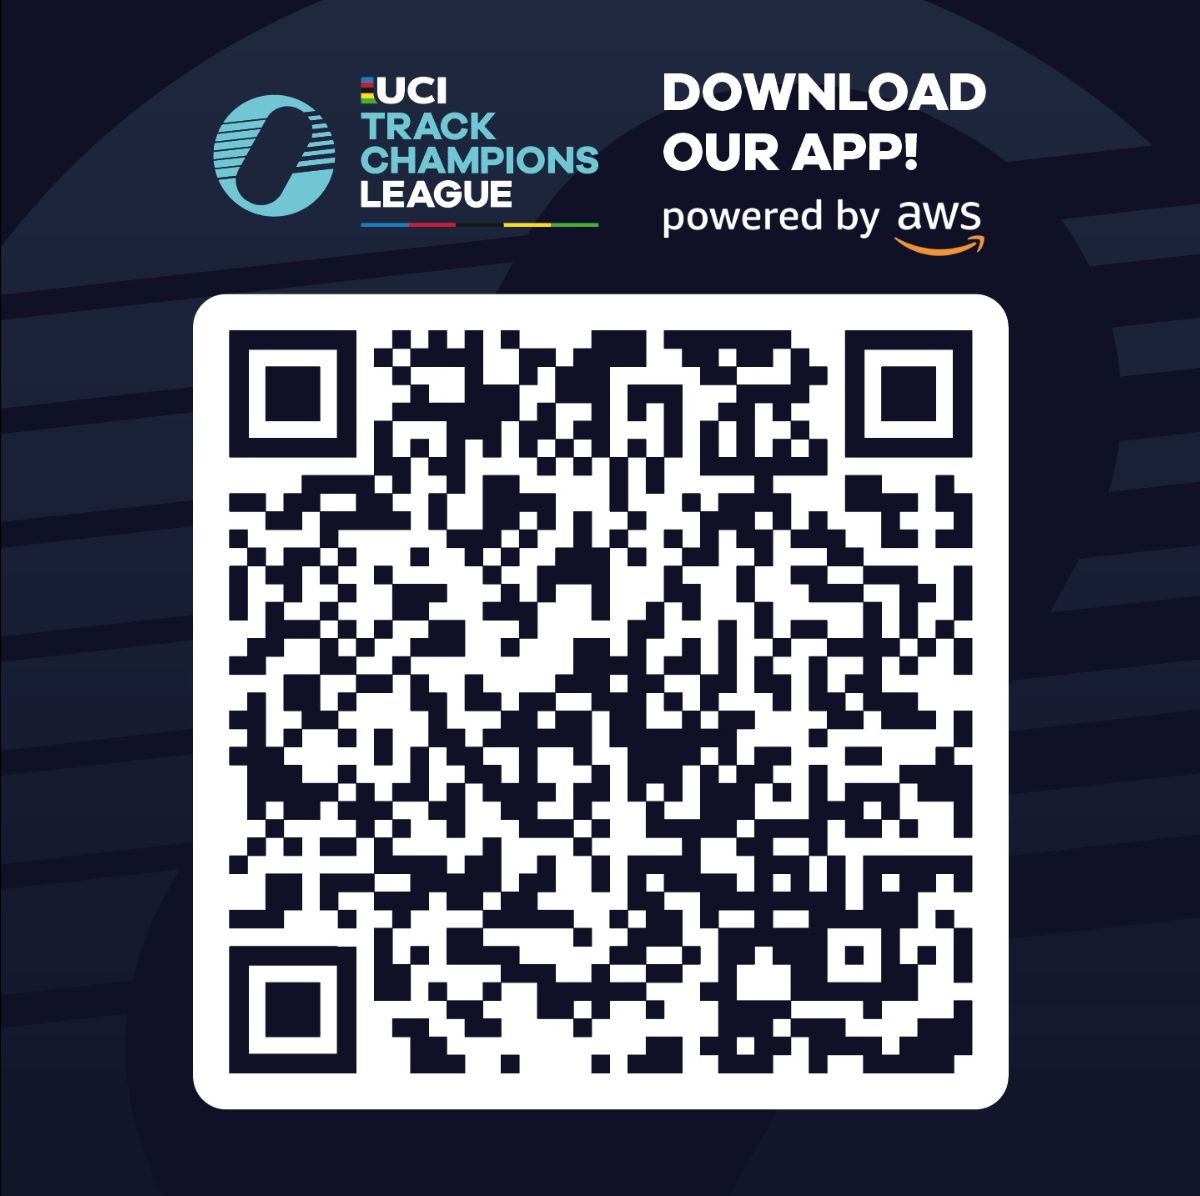 The QR code to download the UCI rider tracking app.